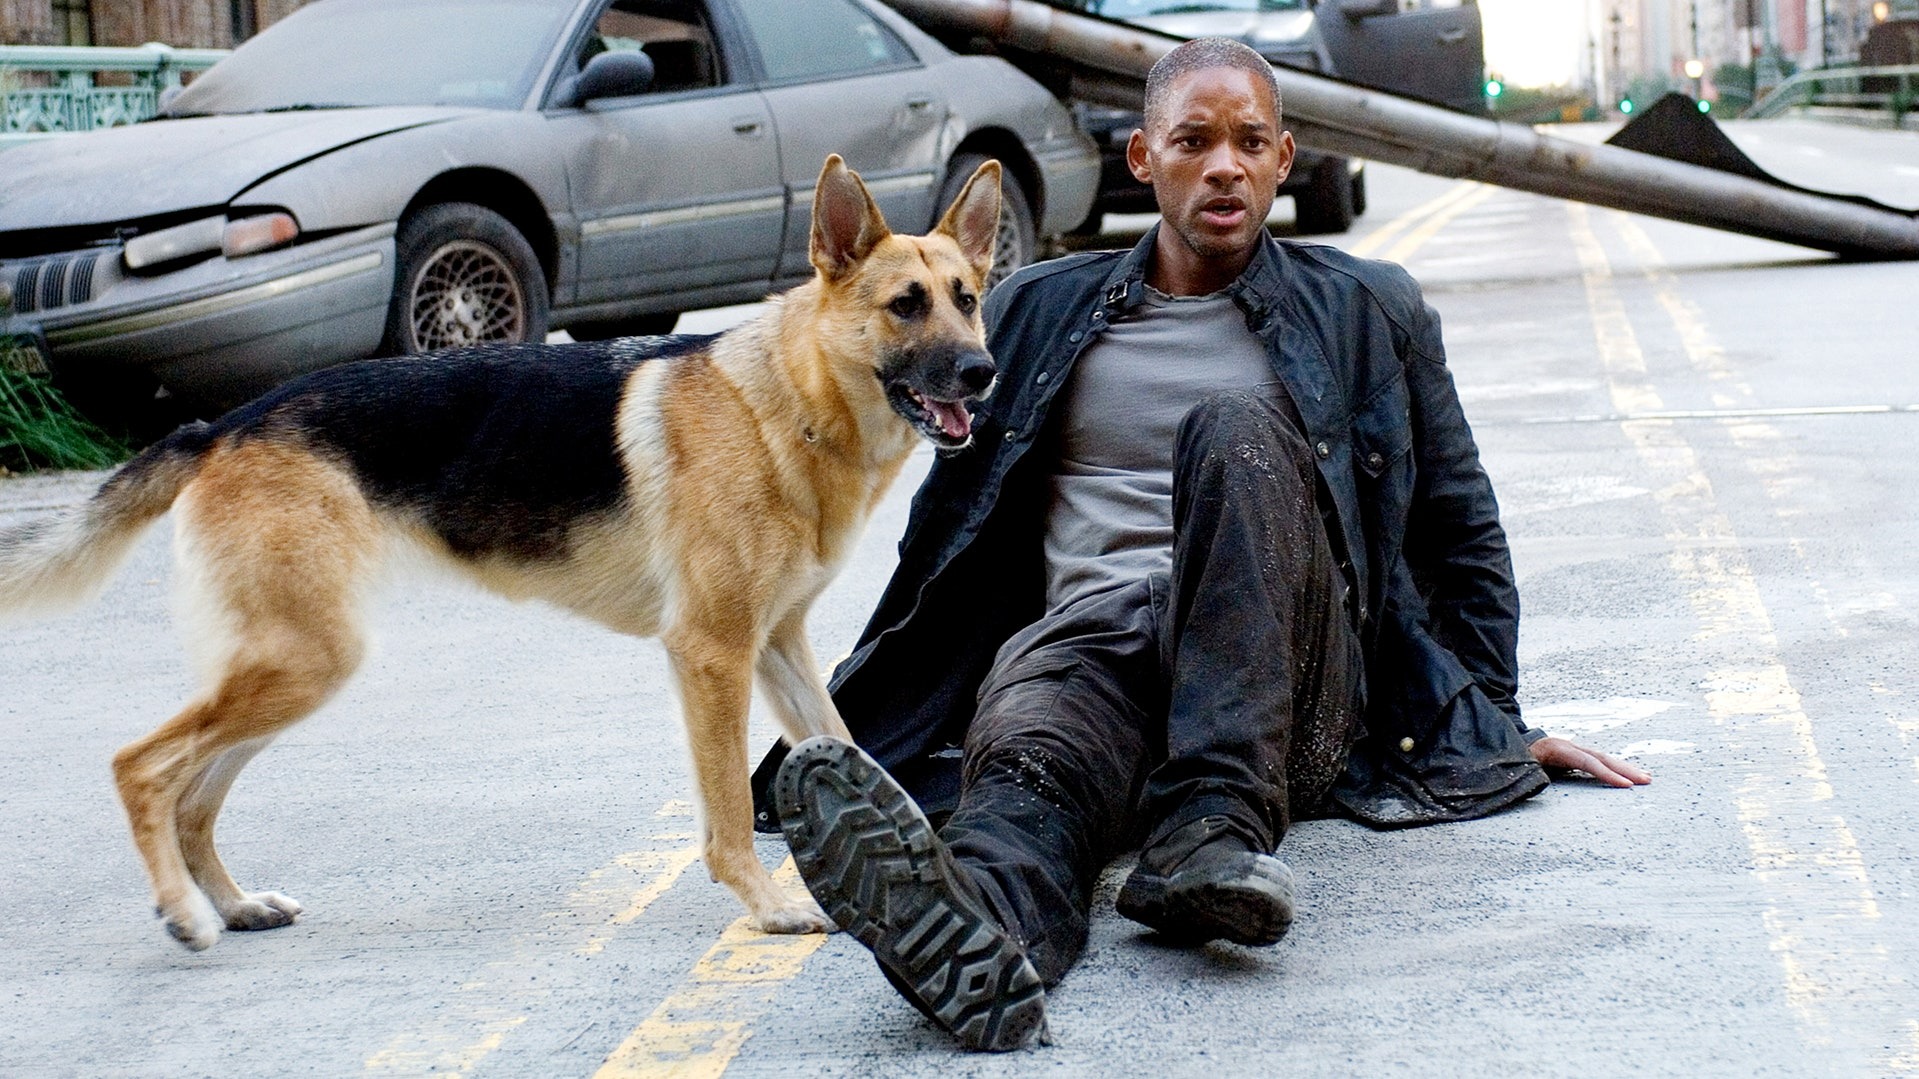 I Am Legend 2 Finally Receives Some Positive Updates From Will Smith Himself